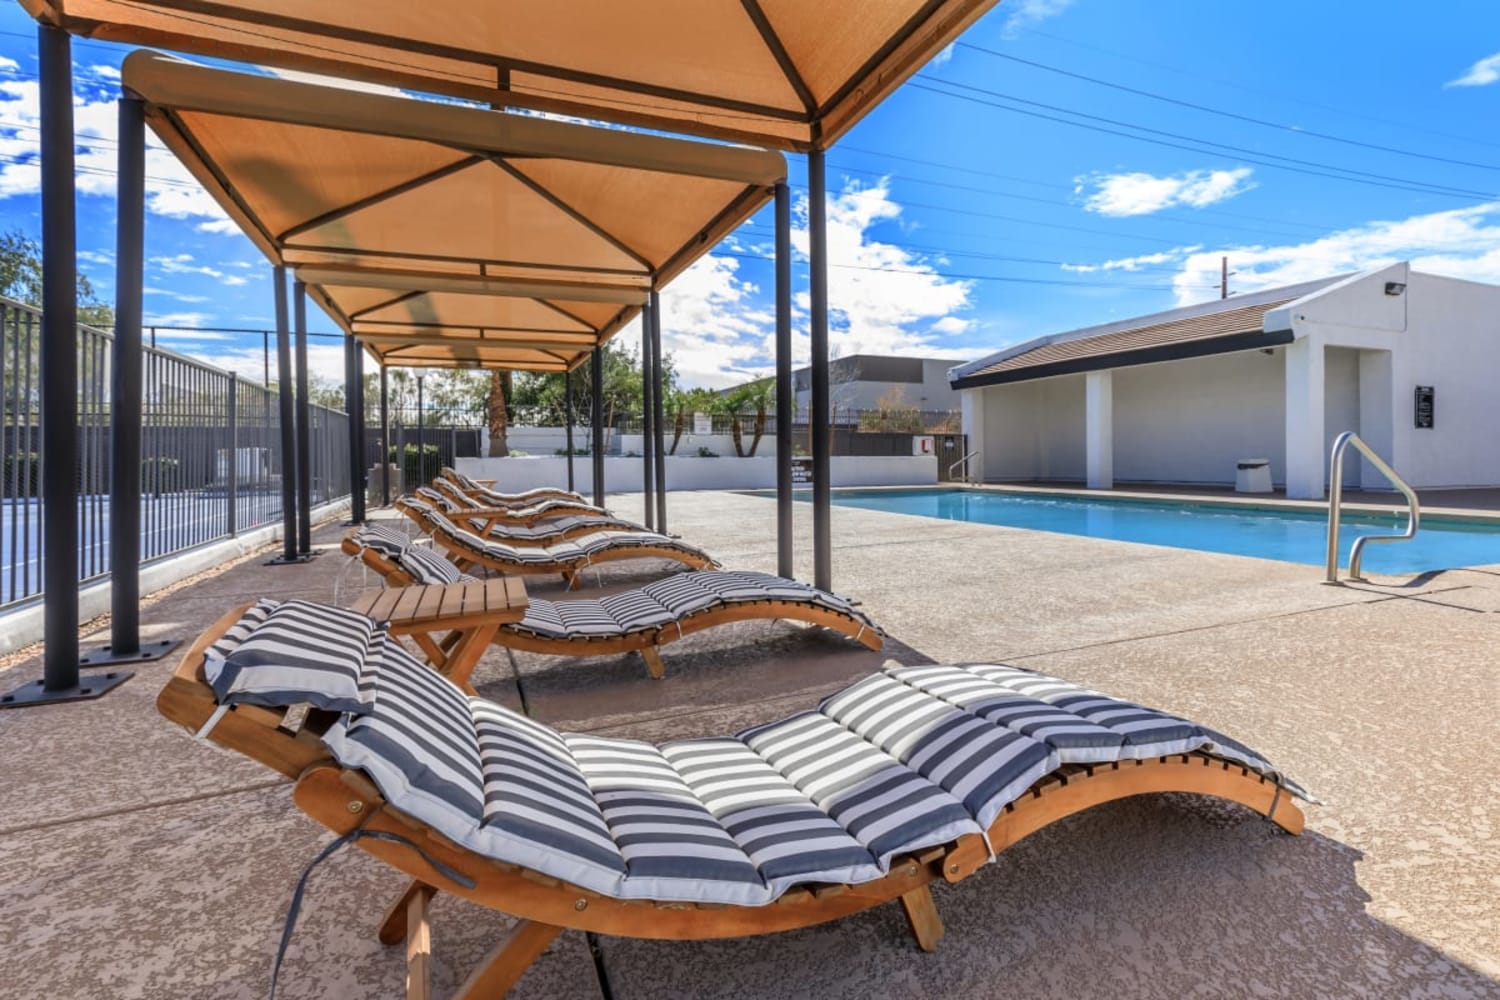 Covered lounge chairs by the pool at Station 21 Apartments in Mesa, Arizona